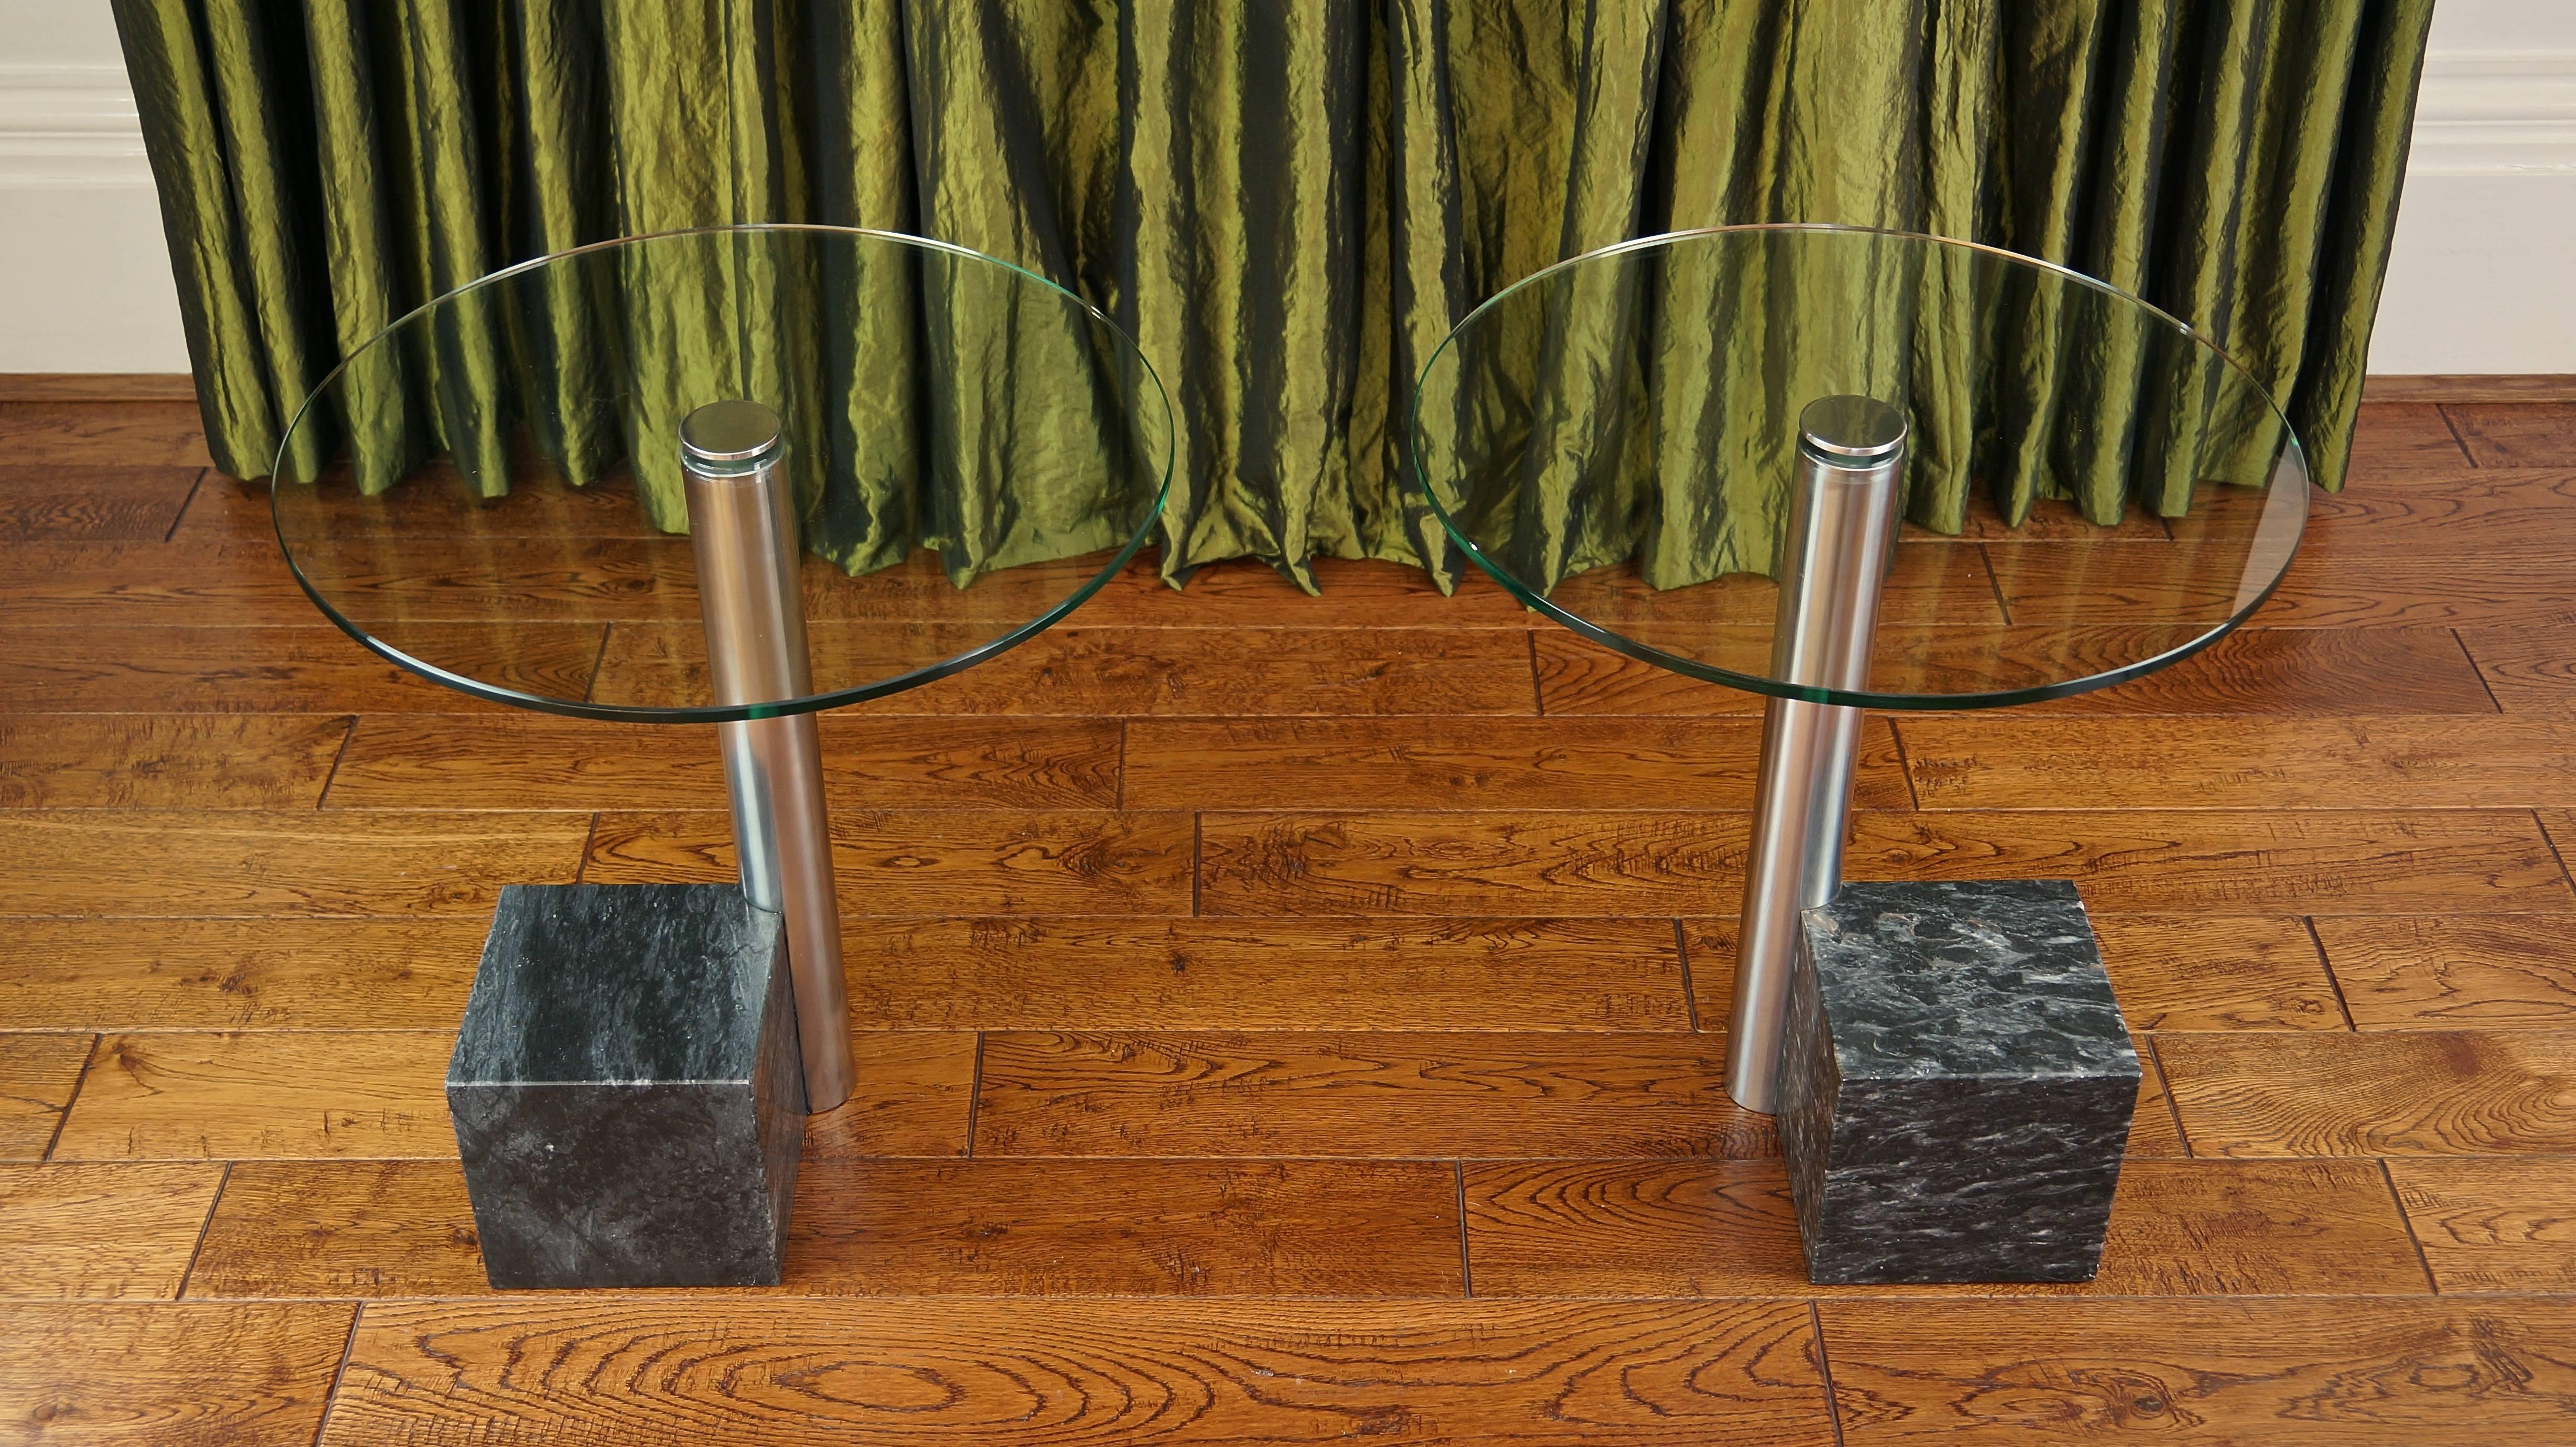 Pair of Vintage Marble and Glass HK2 Side Tables by Hank Kwint, Metaform 1980s For Sale 2